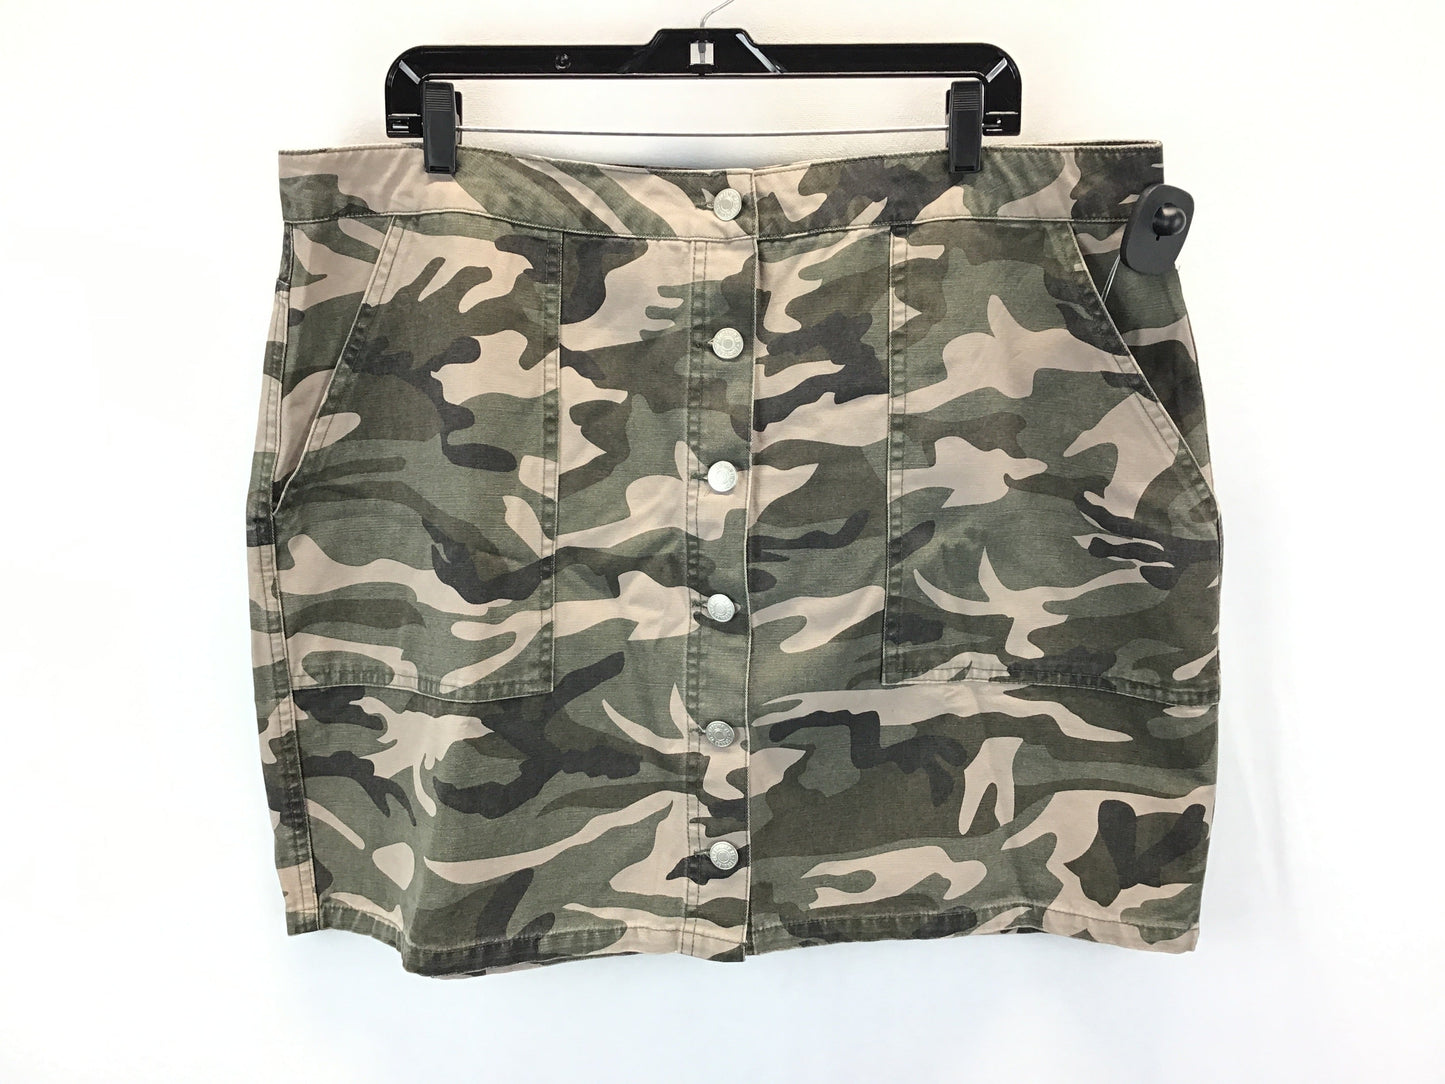 Camouflage Print Skirt Midi Forever 21, Size 2x